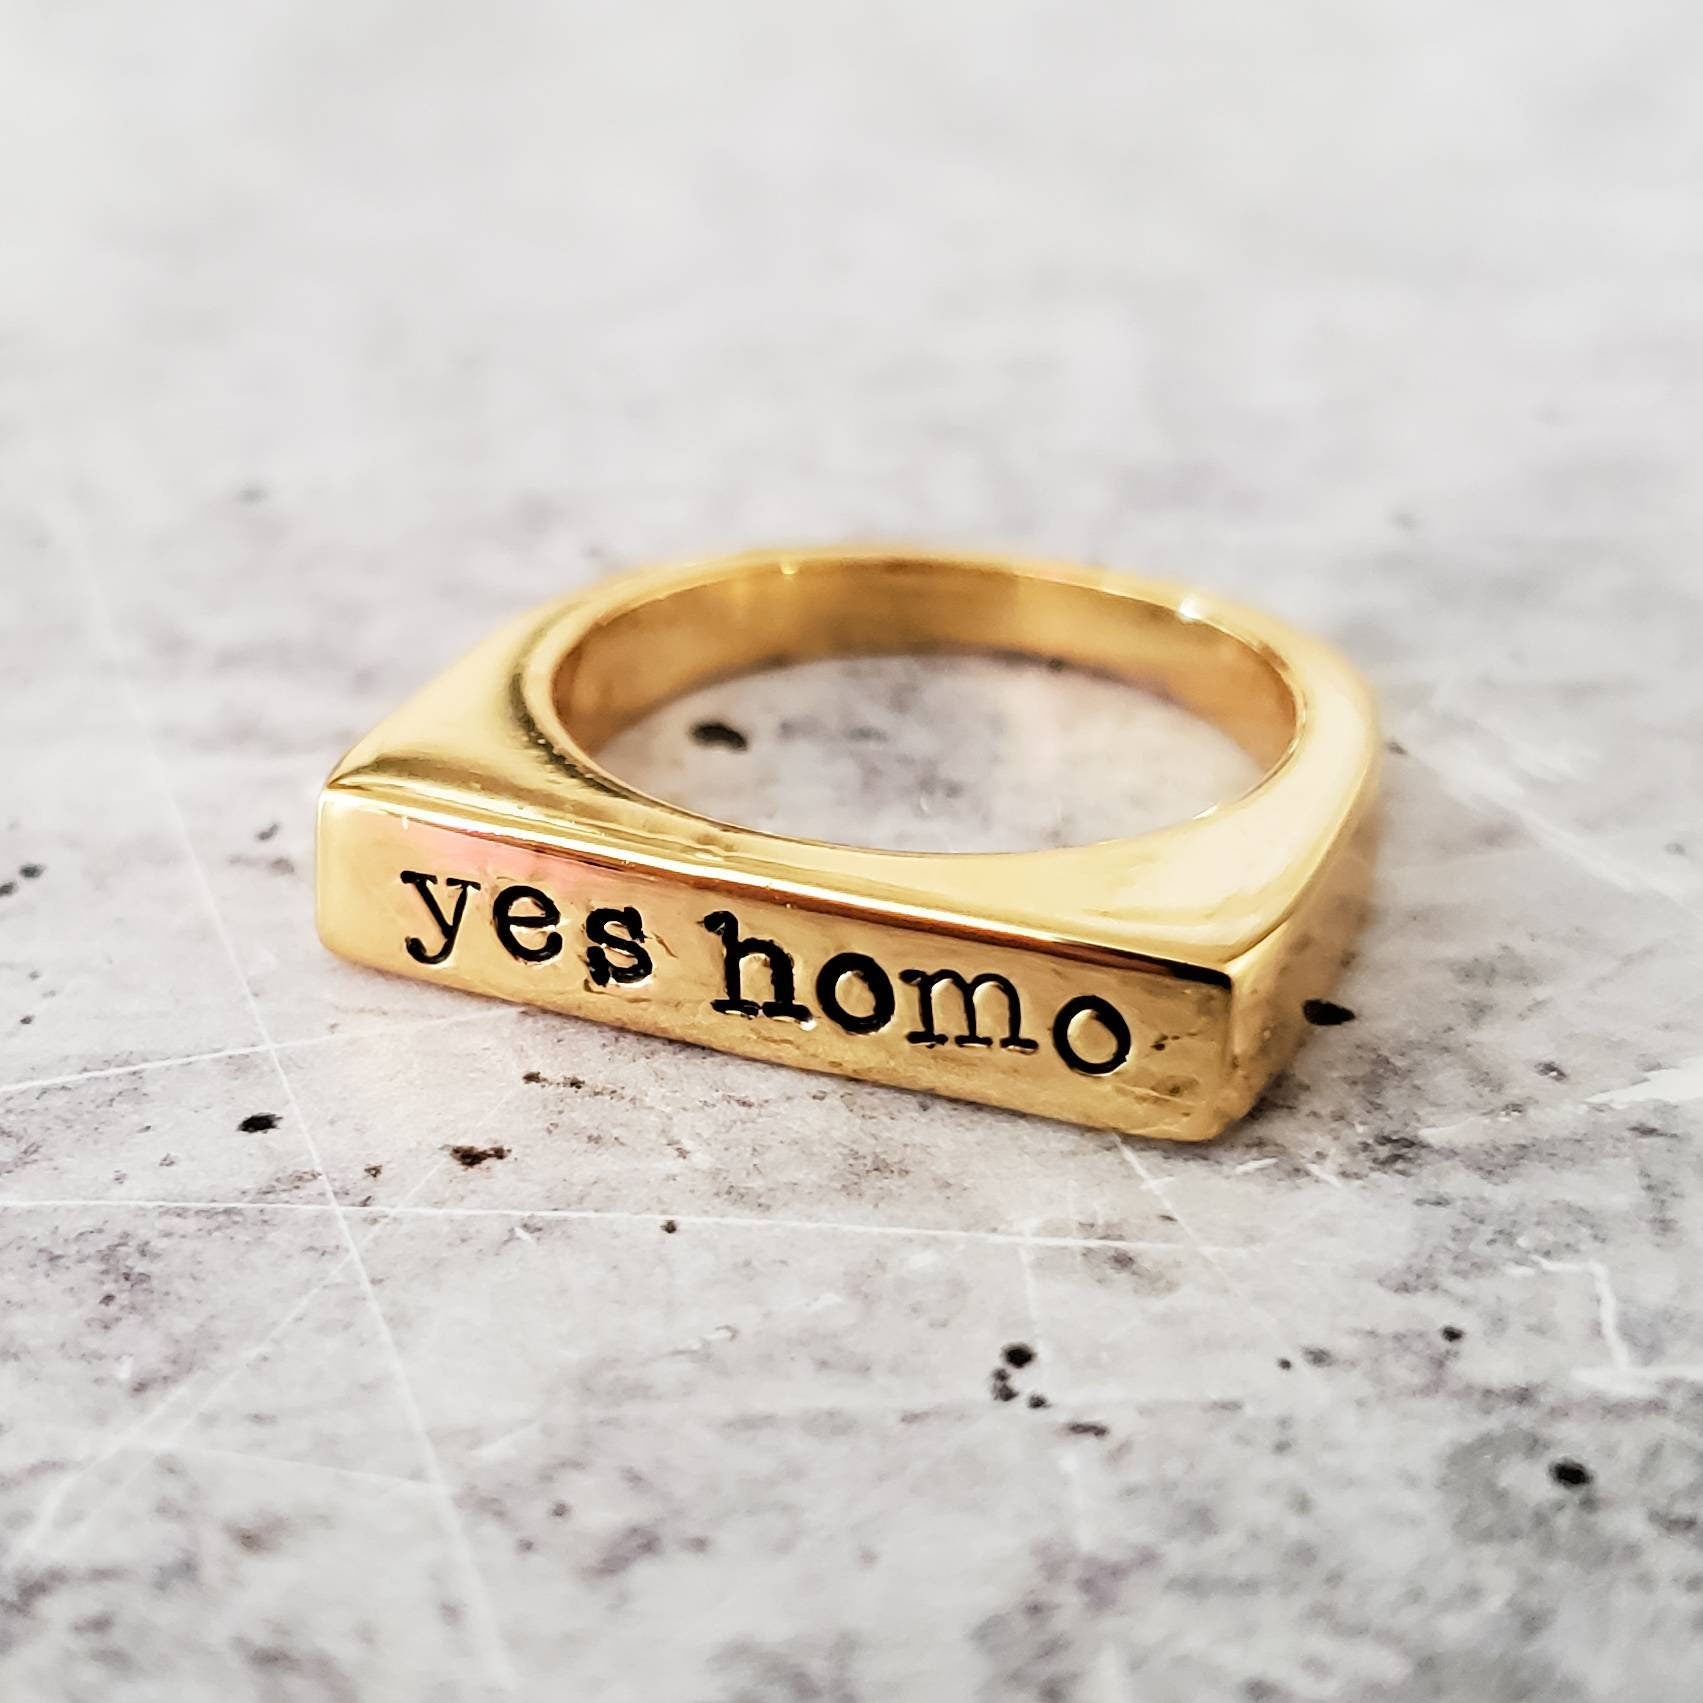 Yes Homo Pride Ring -  LGBTQIA Jewelry - Funny Gold Plated Ring for Gay Friend - Personalized for Non Binary Friend - Gay Pride Jewelry